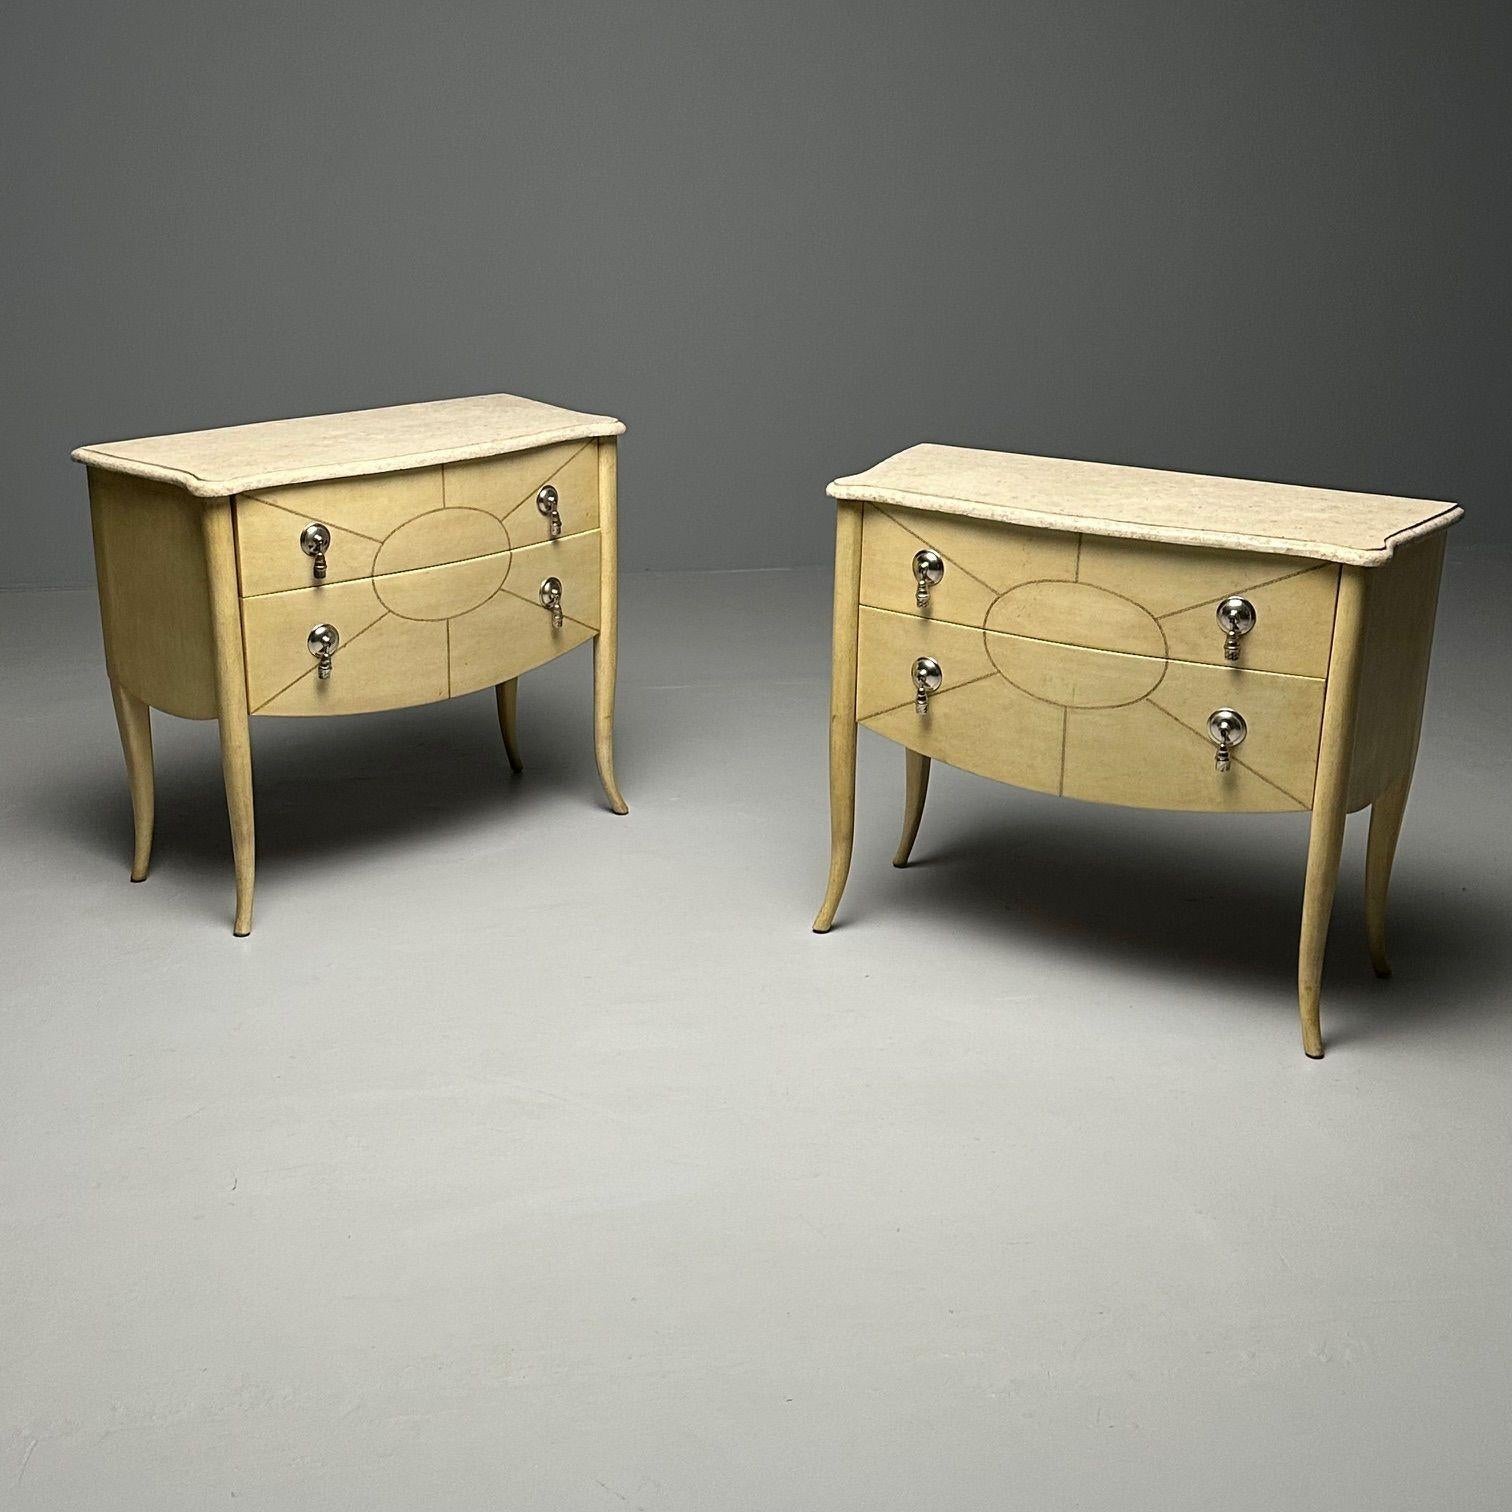 Wood Andre Groult Style, Art Deco, Commodes, Beige Parchment Paper, Nickel, 1990s For Sale